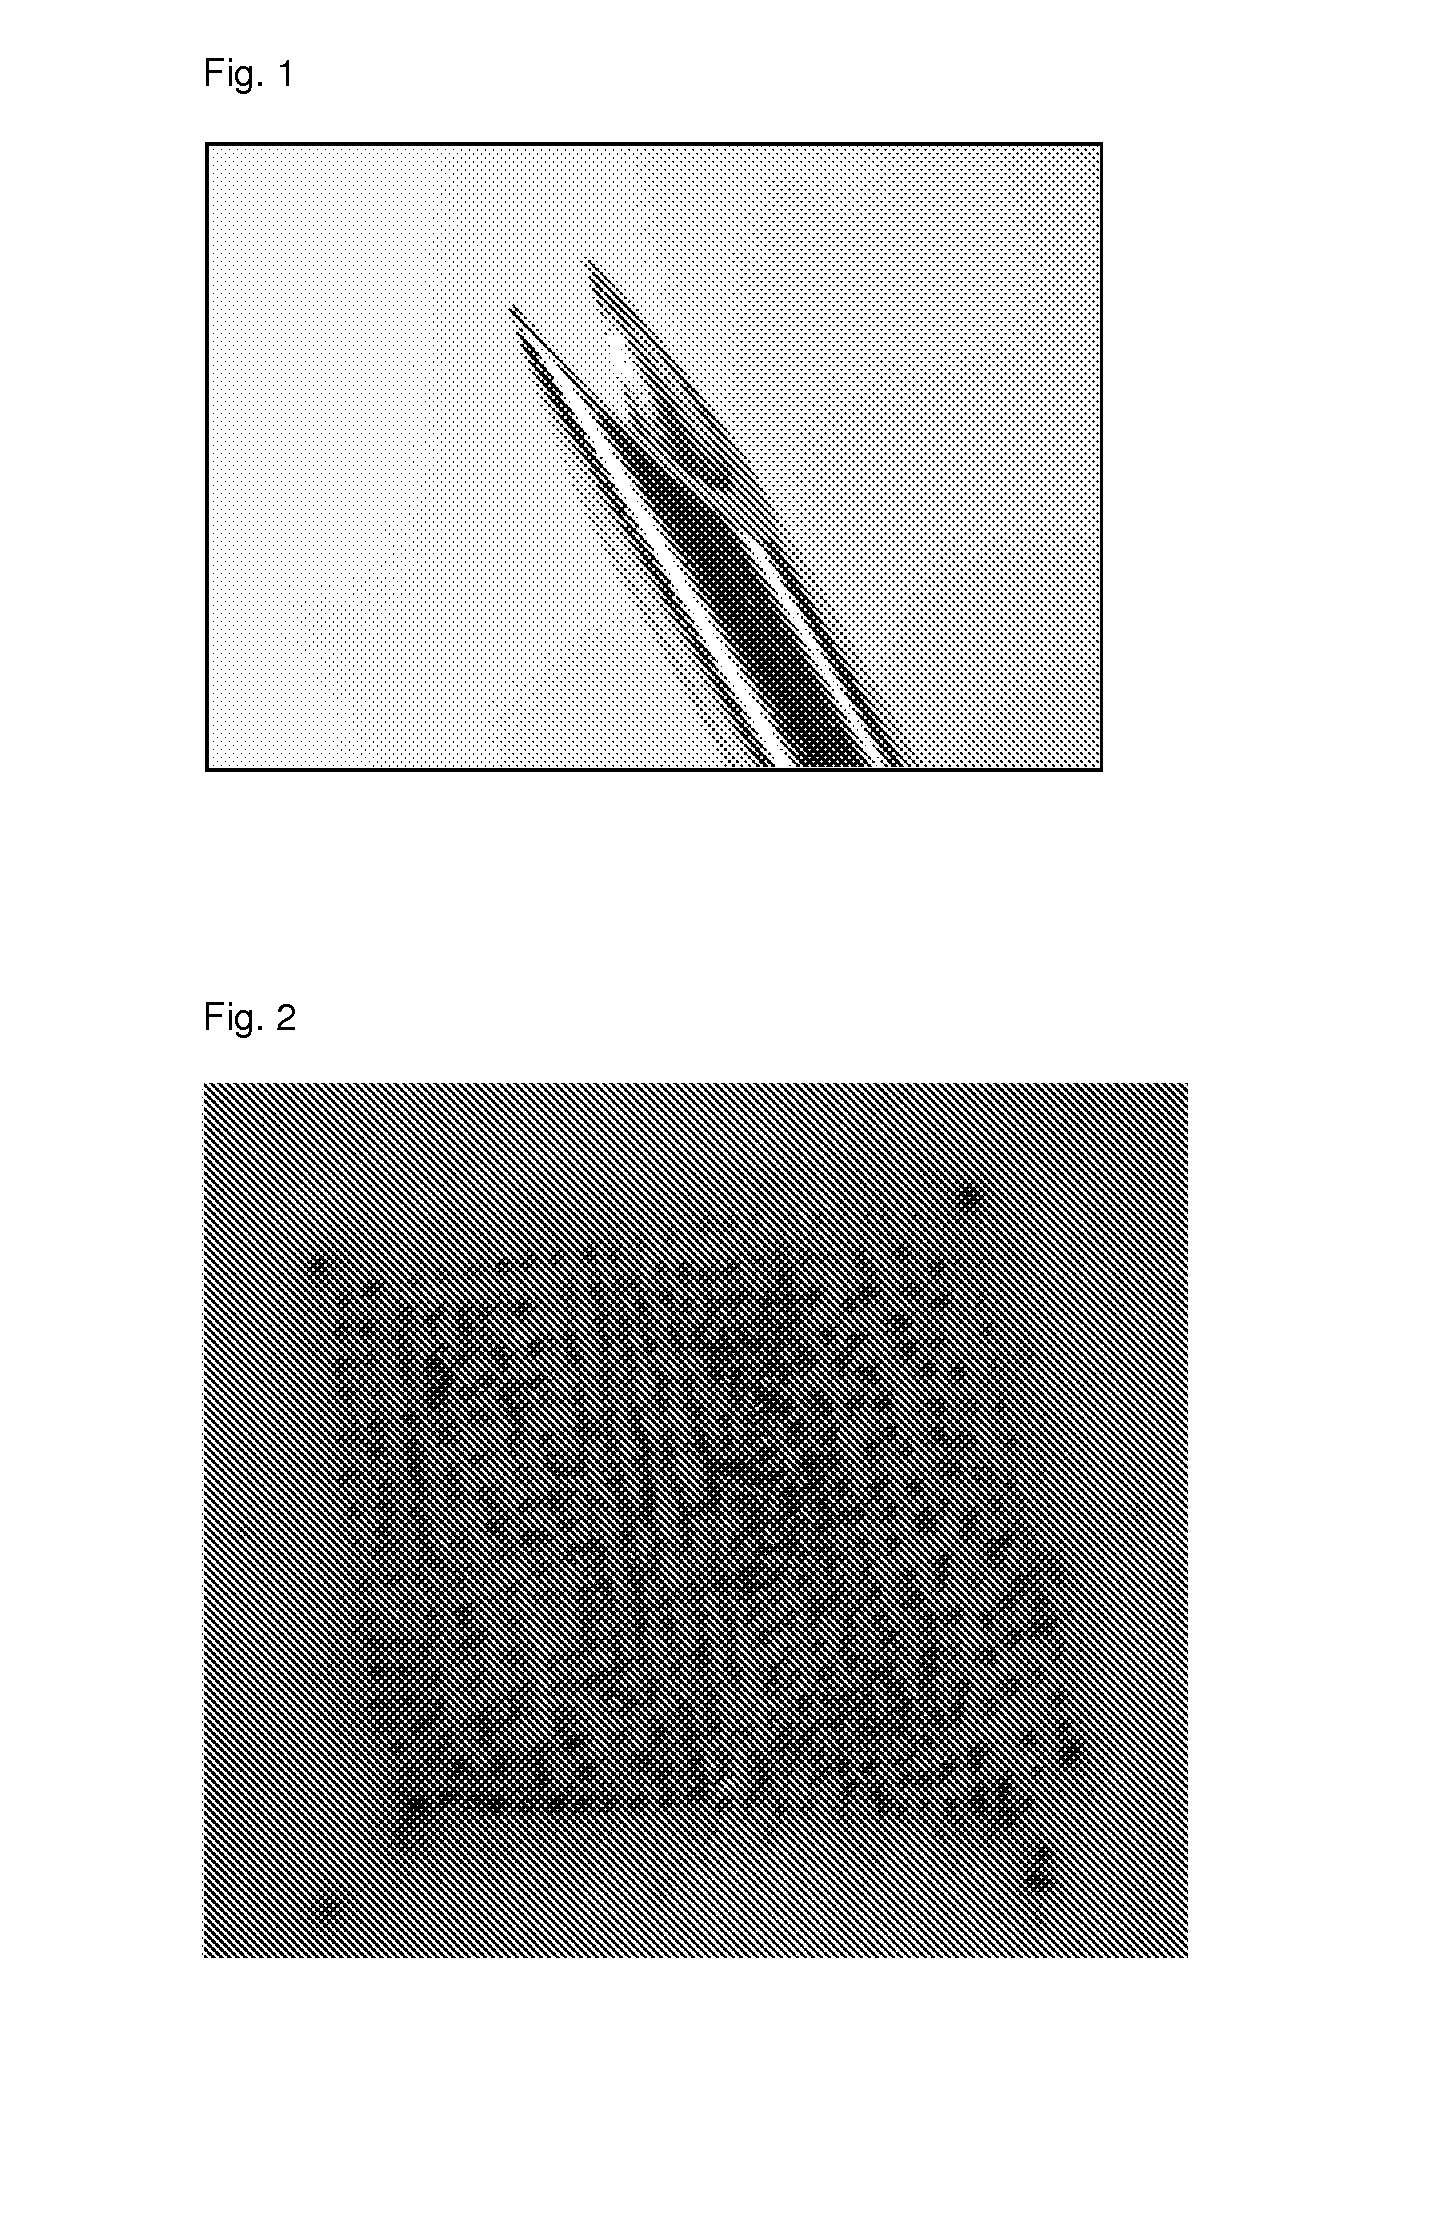 Methods and devices for manipulating subdermal fat